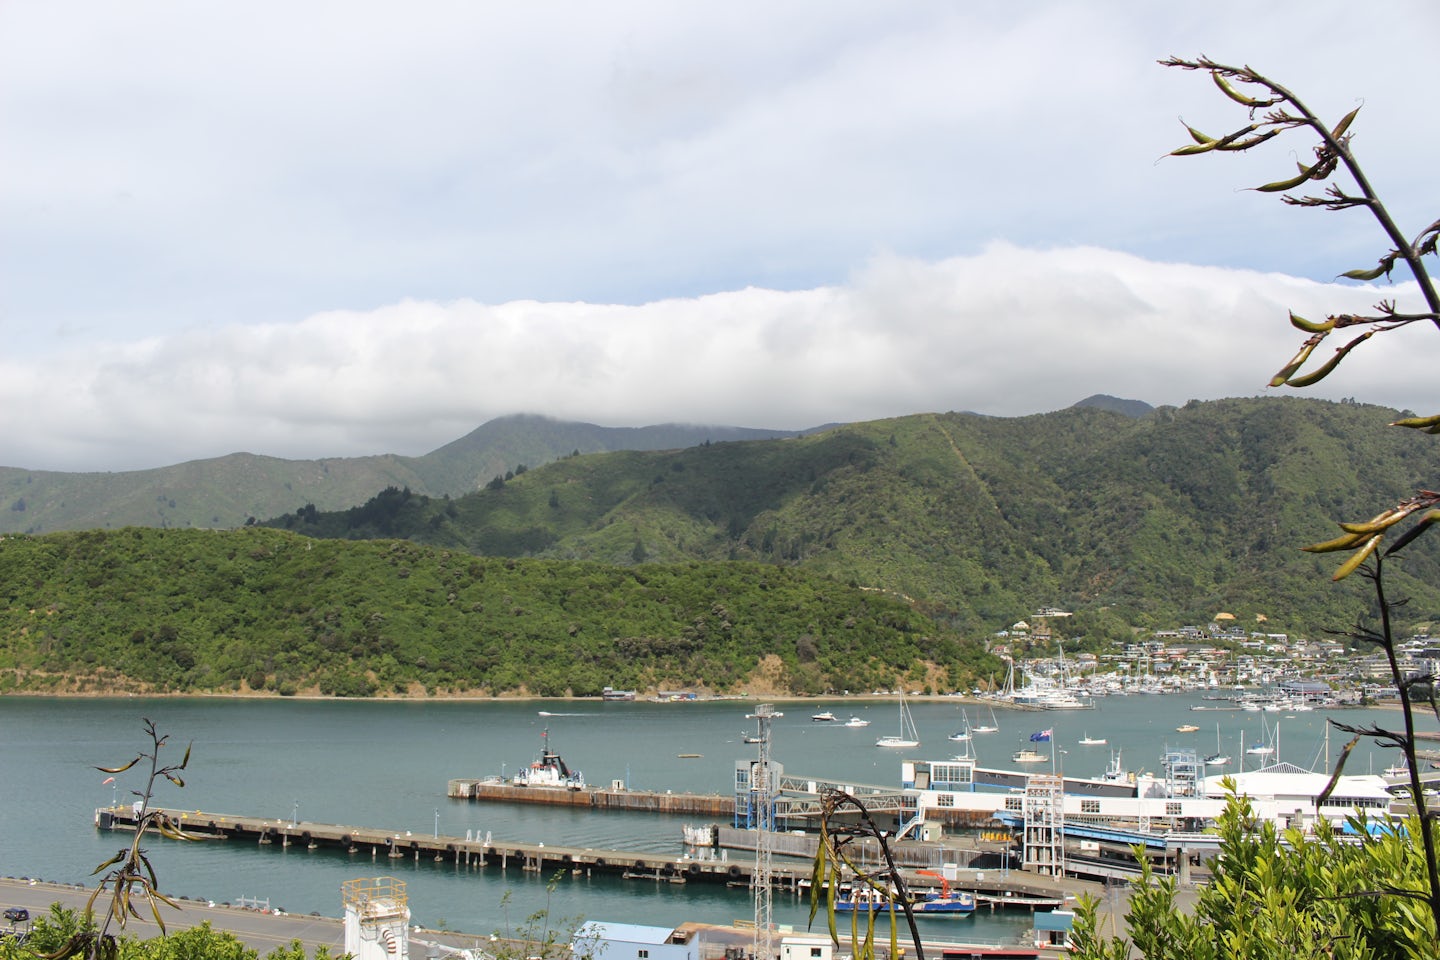 View of Picton